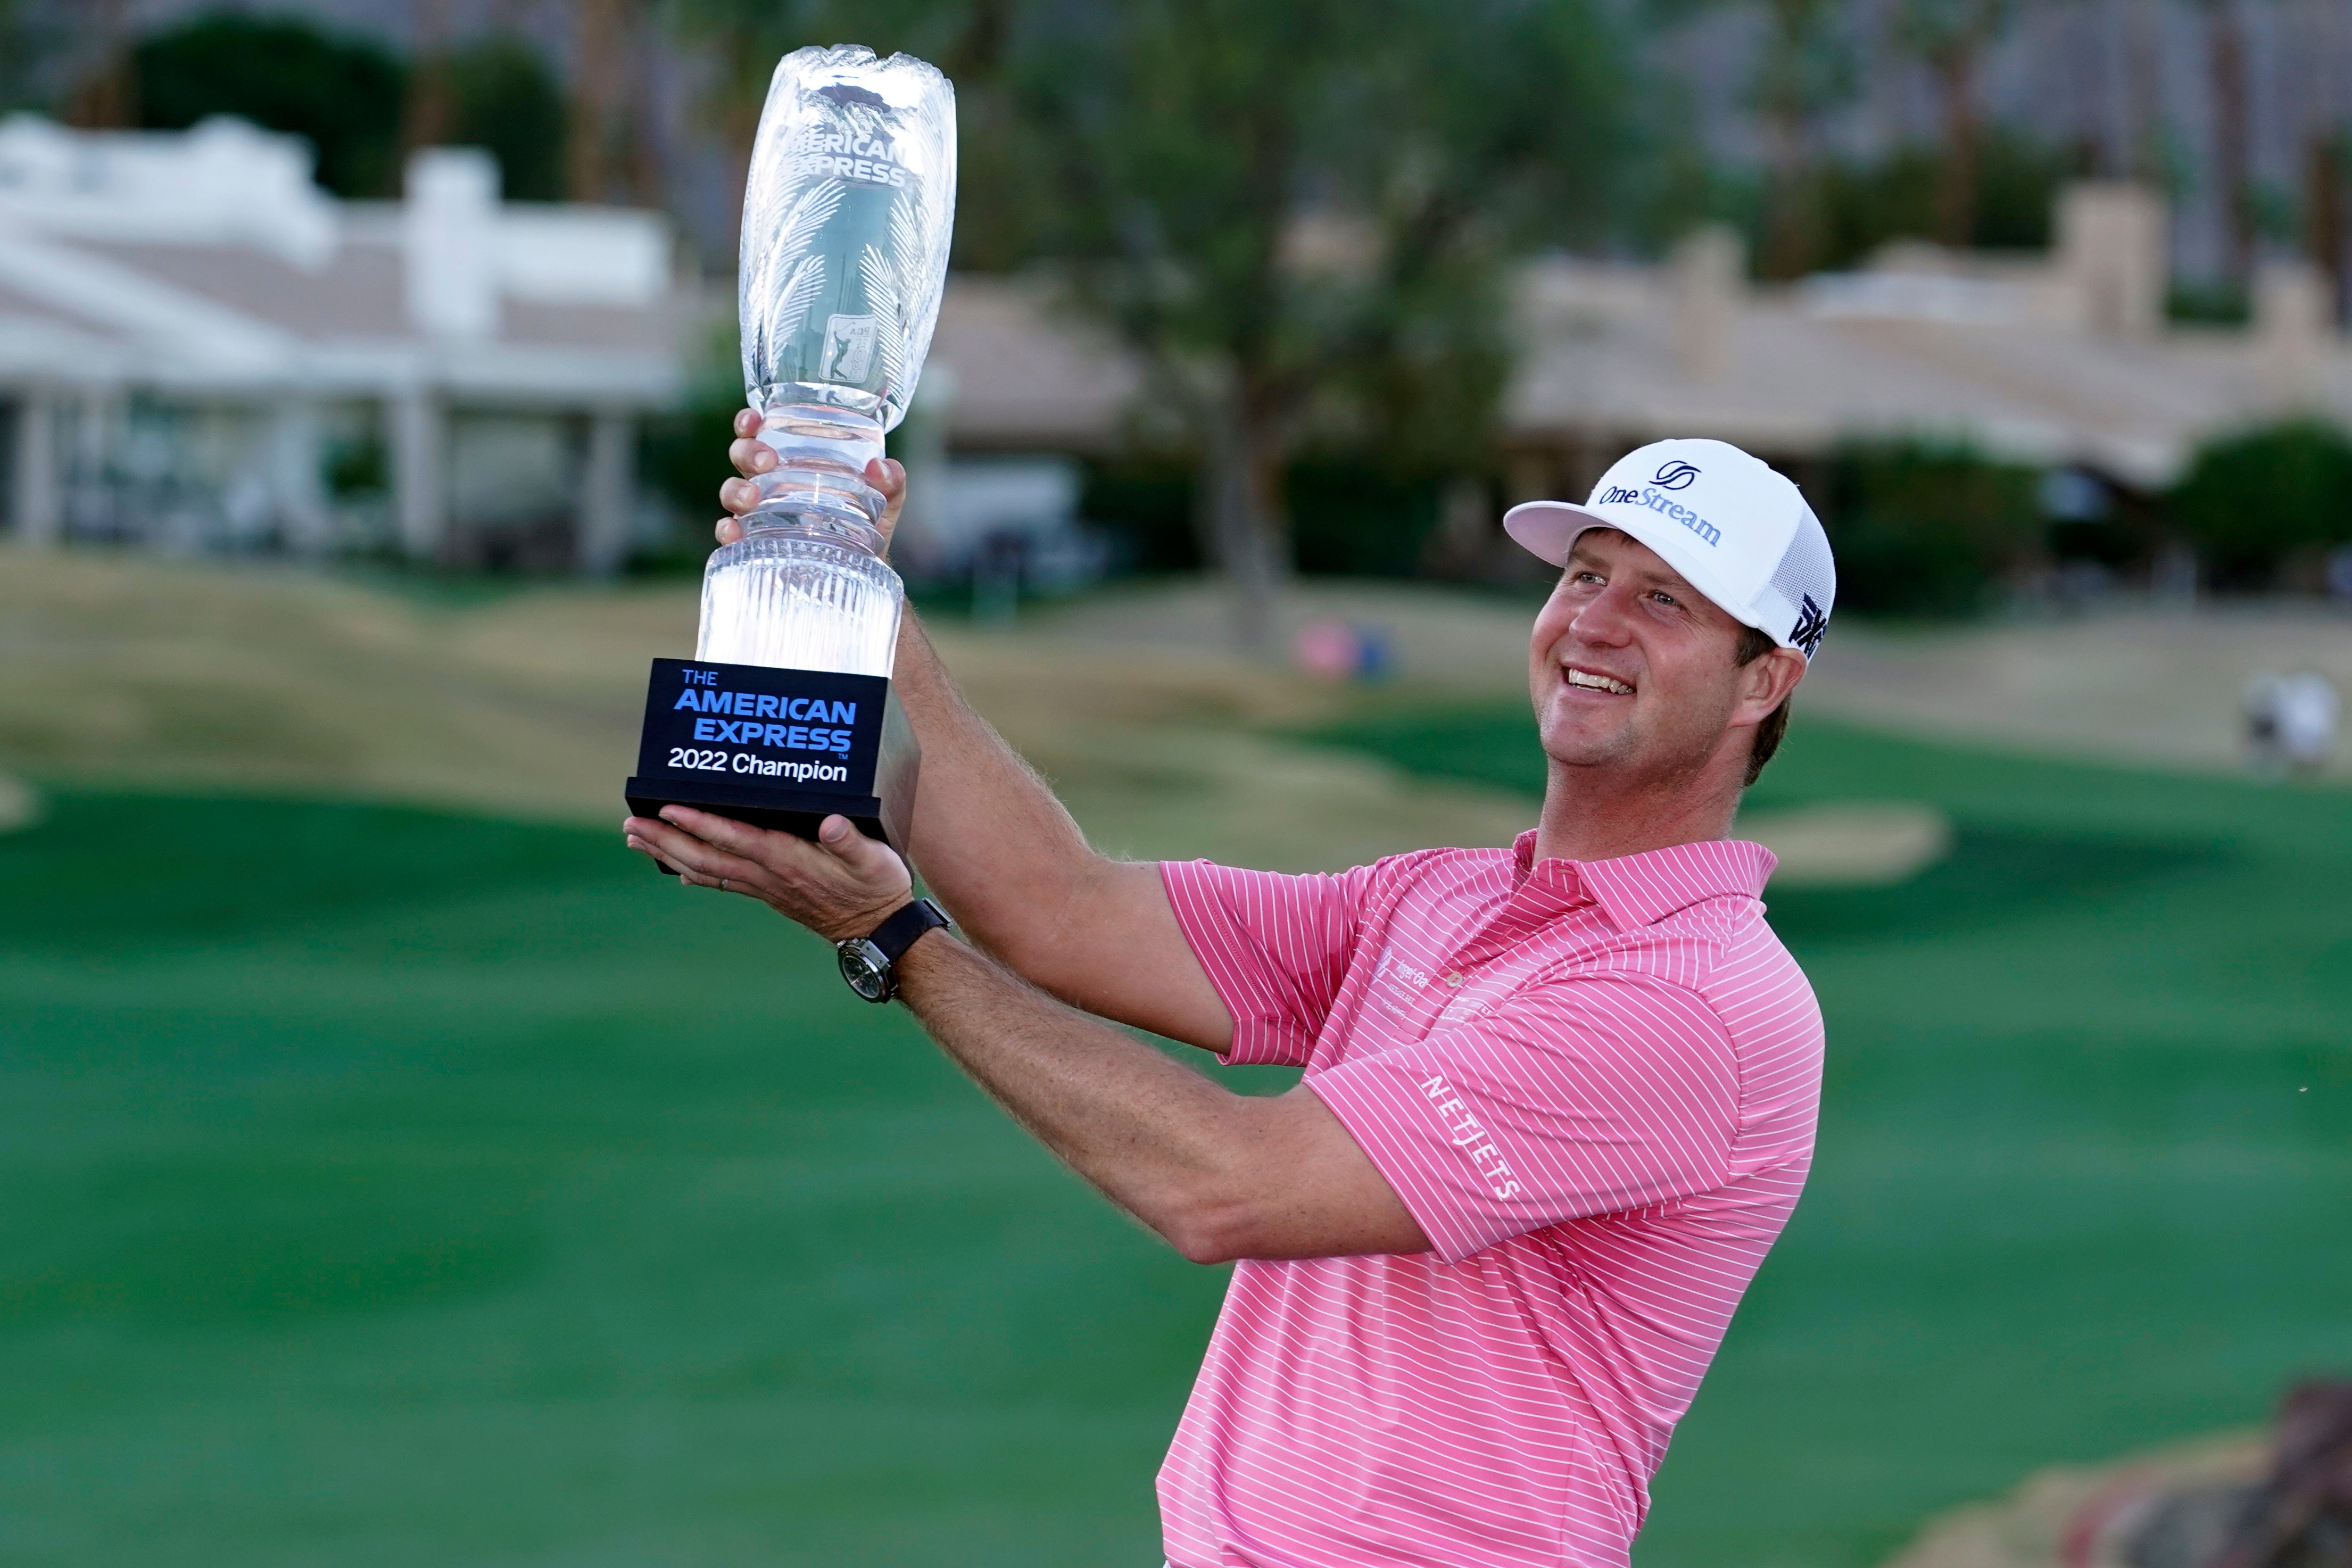 Hudson Swafford lifts the winner’s trophy at the end of the American Express in La Quinta, California (AP Photo/Marcio Jose Sanchez)